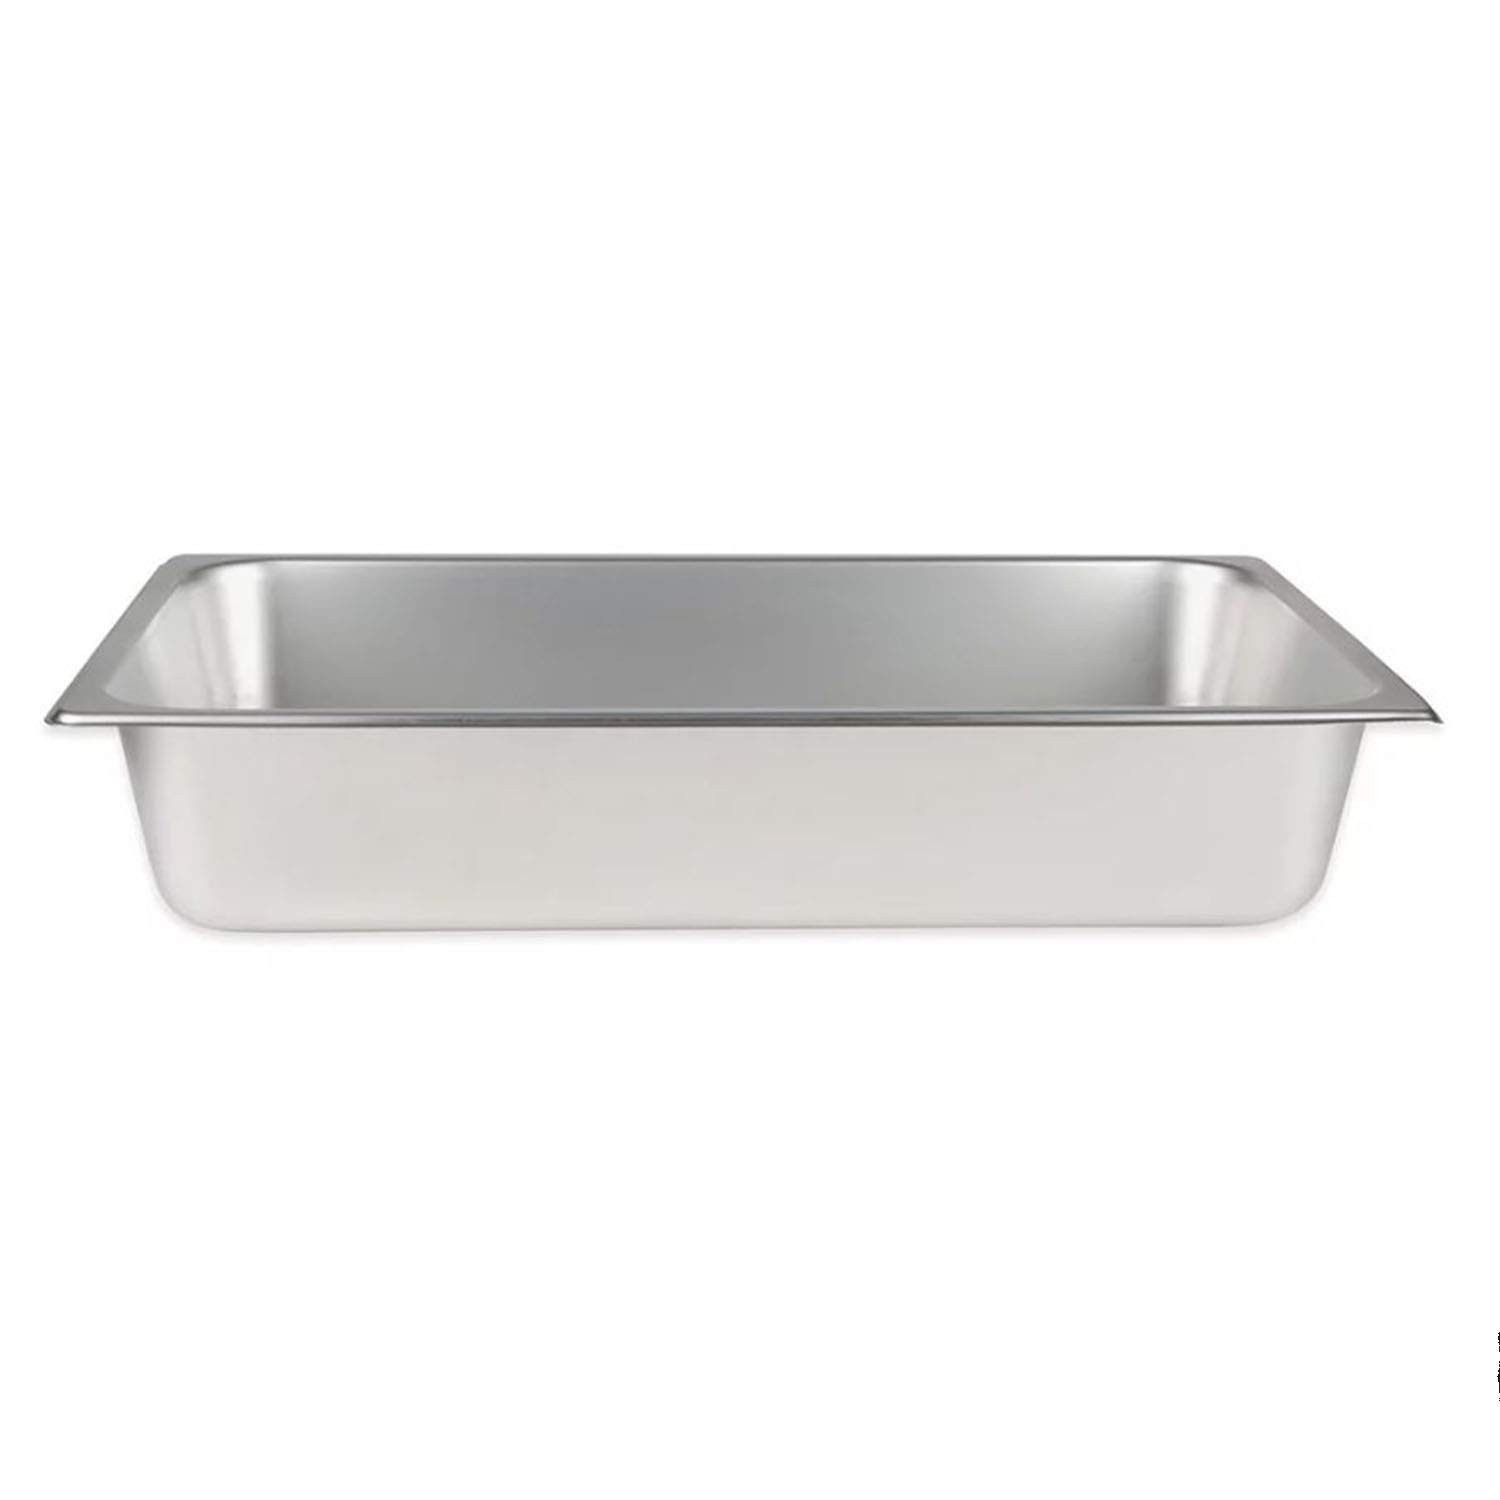 TigerChef Full Size Stainless Steel Steam Table Pan 4" Deep - 2 pcs